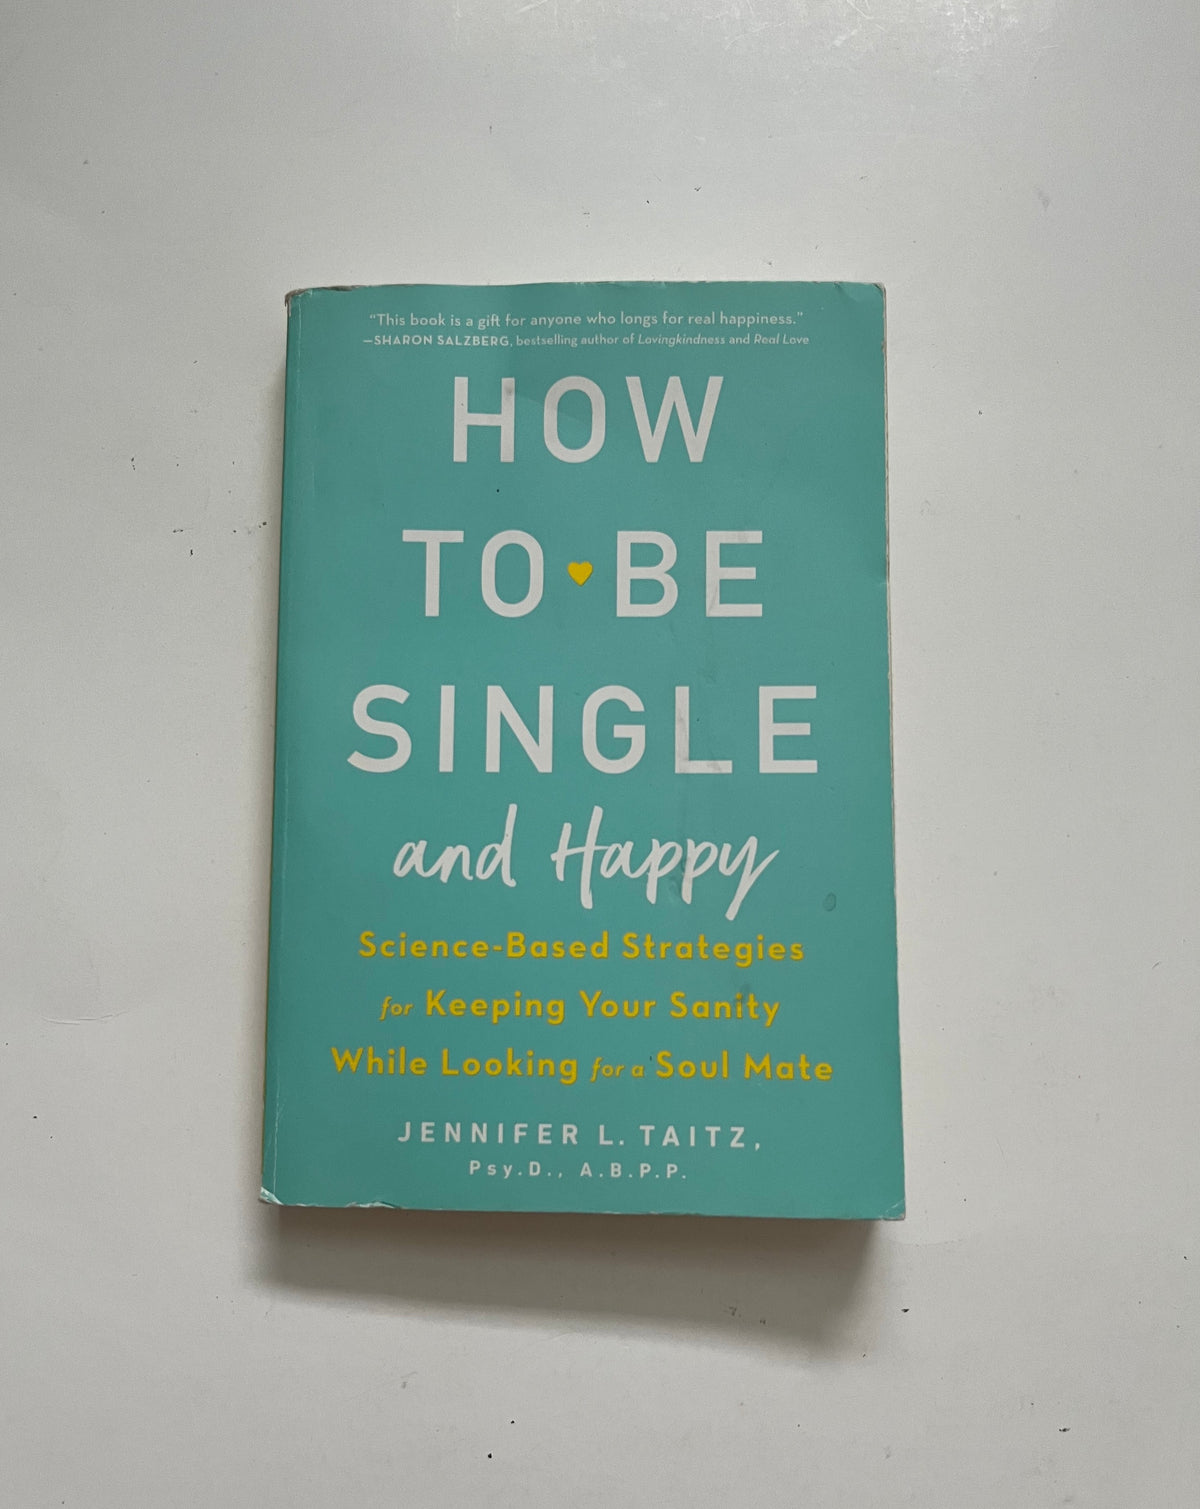 How to be Single and Happy: Science-Based Strategies for Keeping Your Sanity While Looking for a Soul Mate by Jennifer L. Taitz